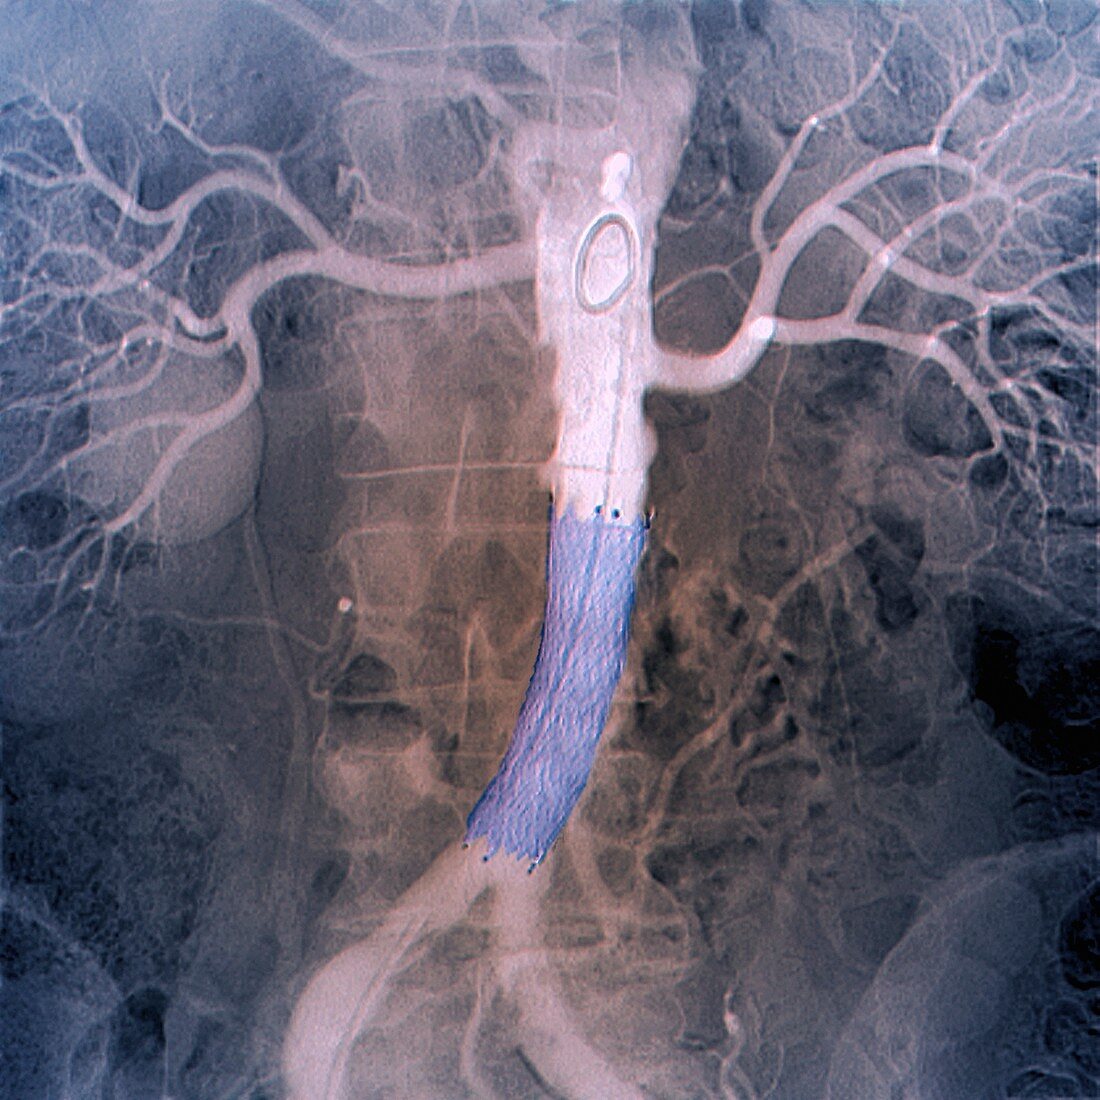 Final position of stent in aorta, X-ray